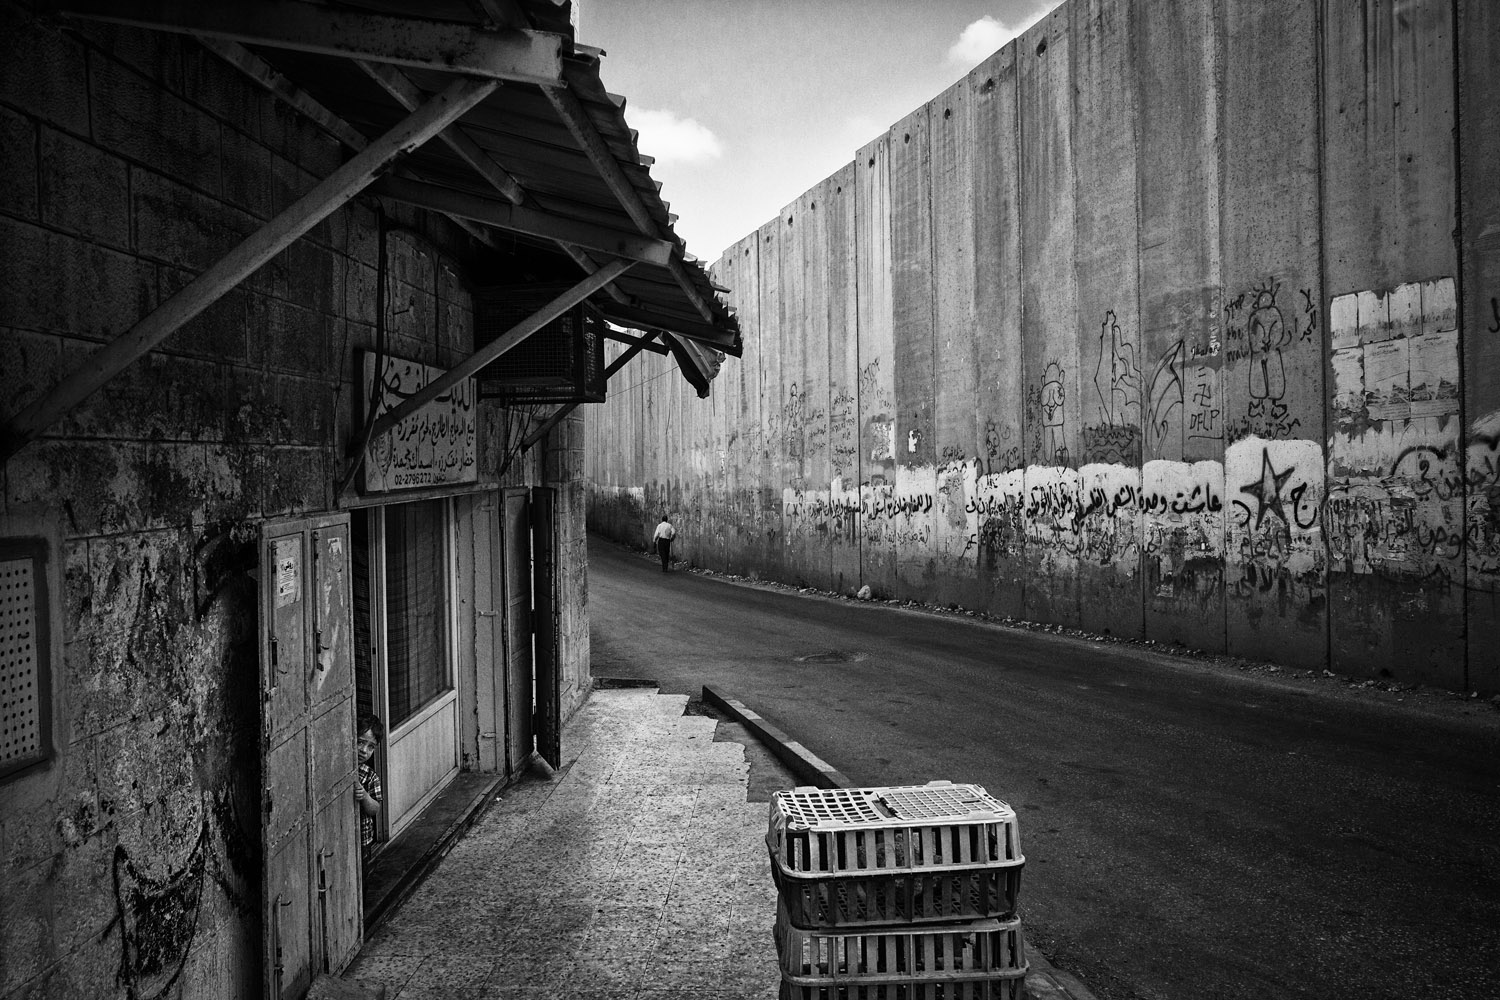 The separation wall in the West Bank, June 9, 2013.